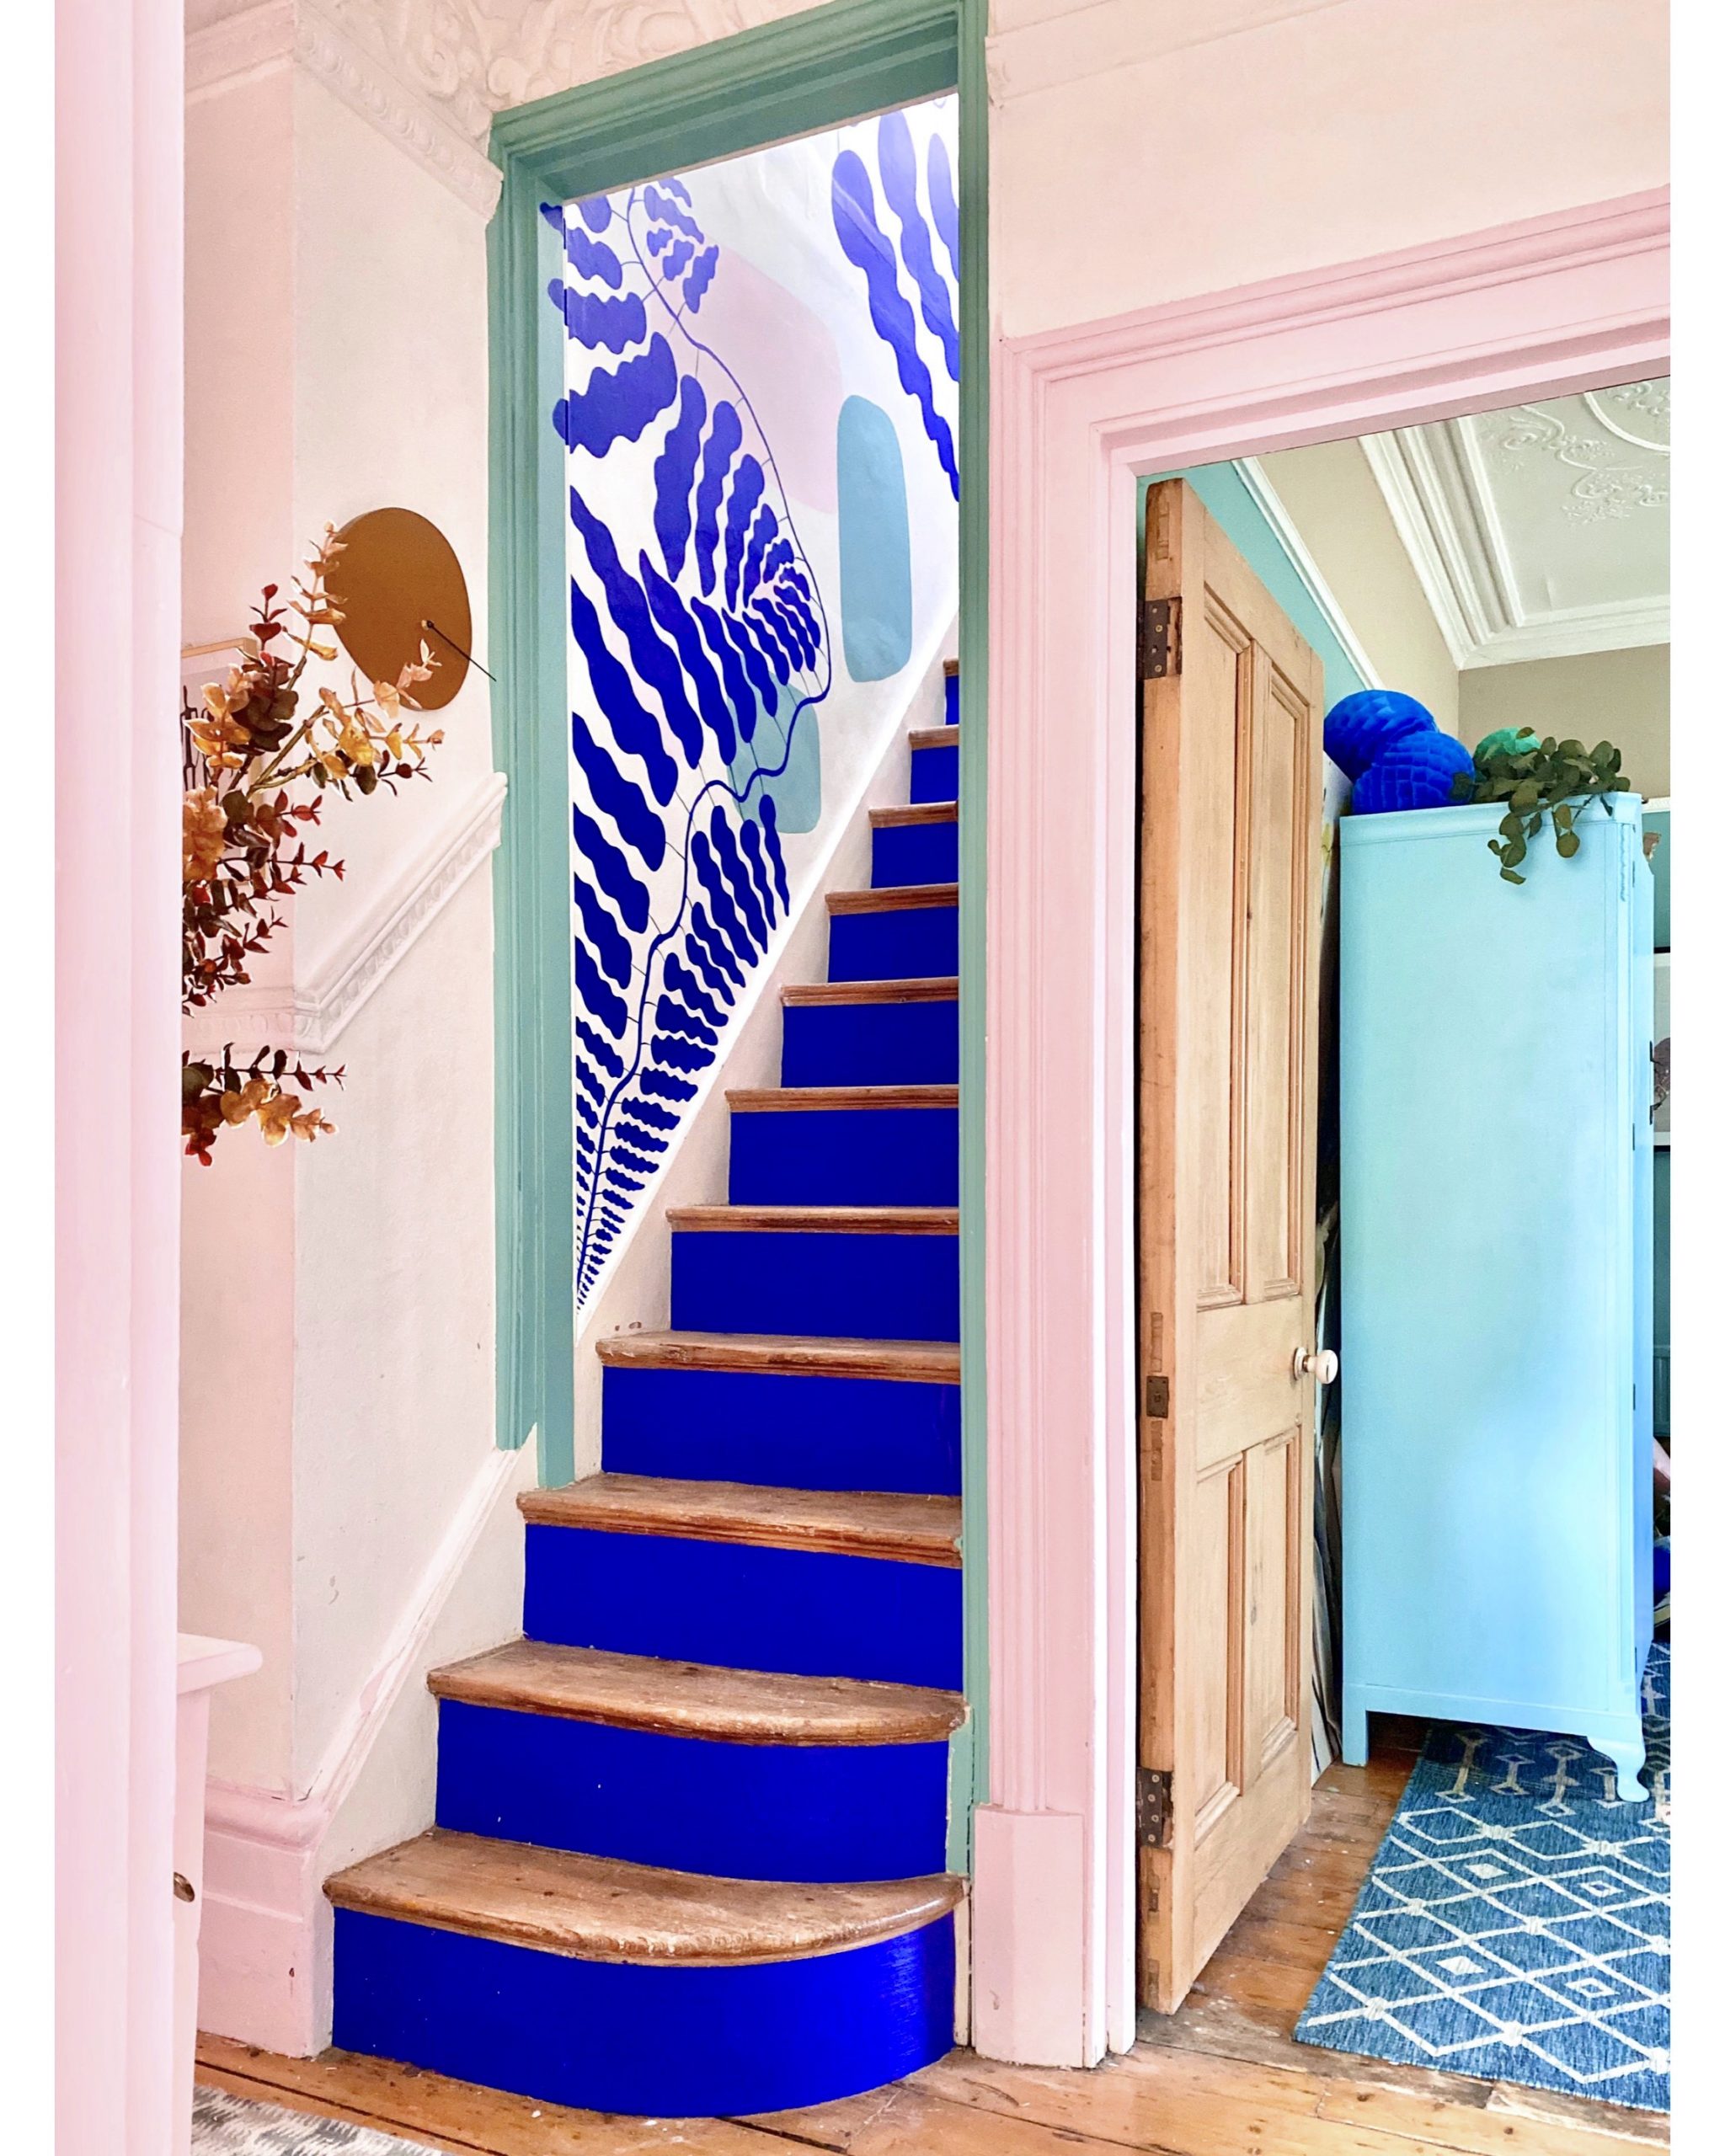 House tour of stunning London home with pastel hues and colourful wall murals - blush pink and cobalt blue hallway